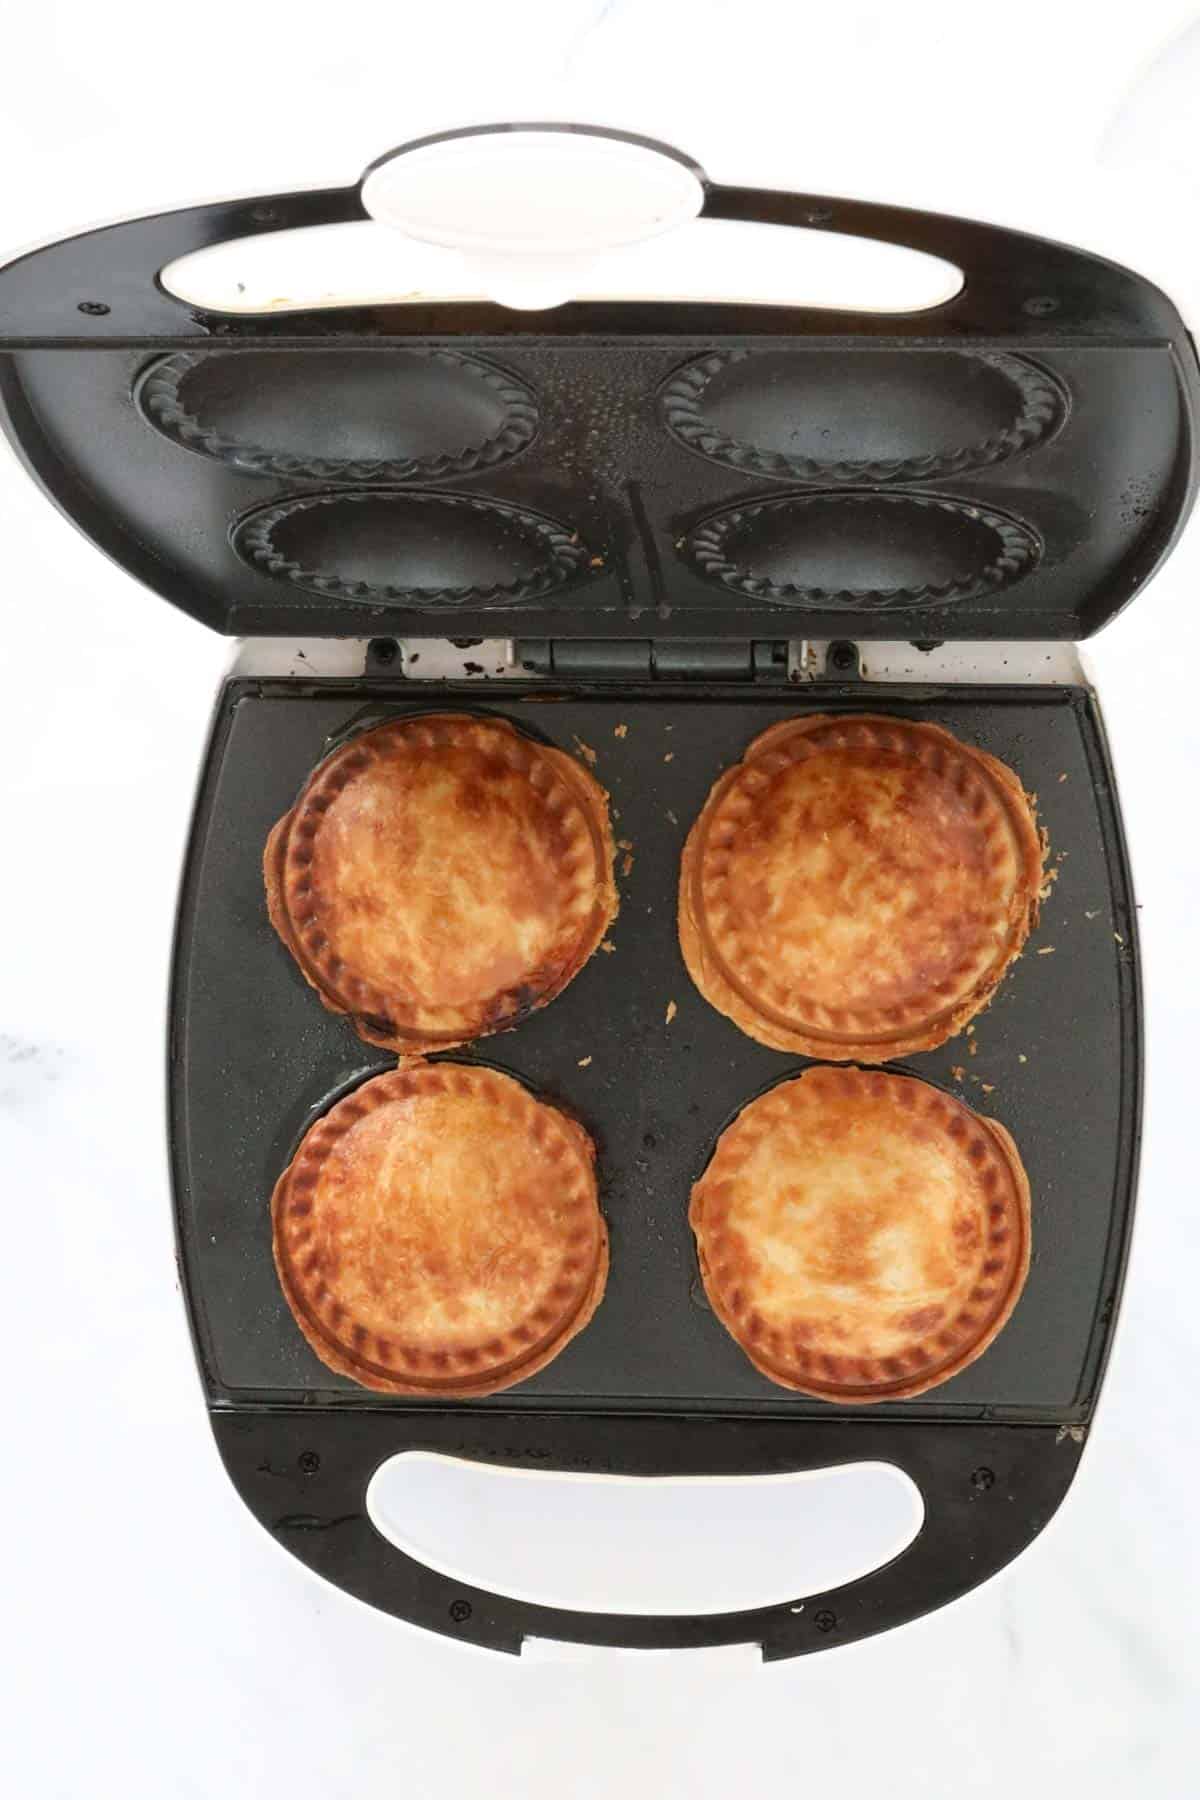 4 cooked pies in a pie maker.